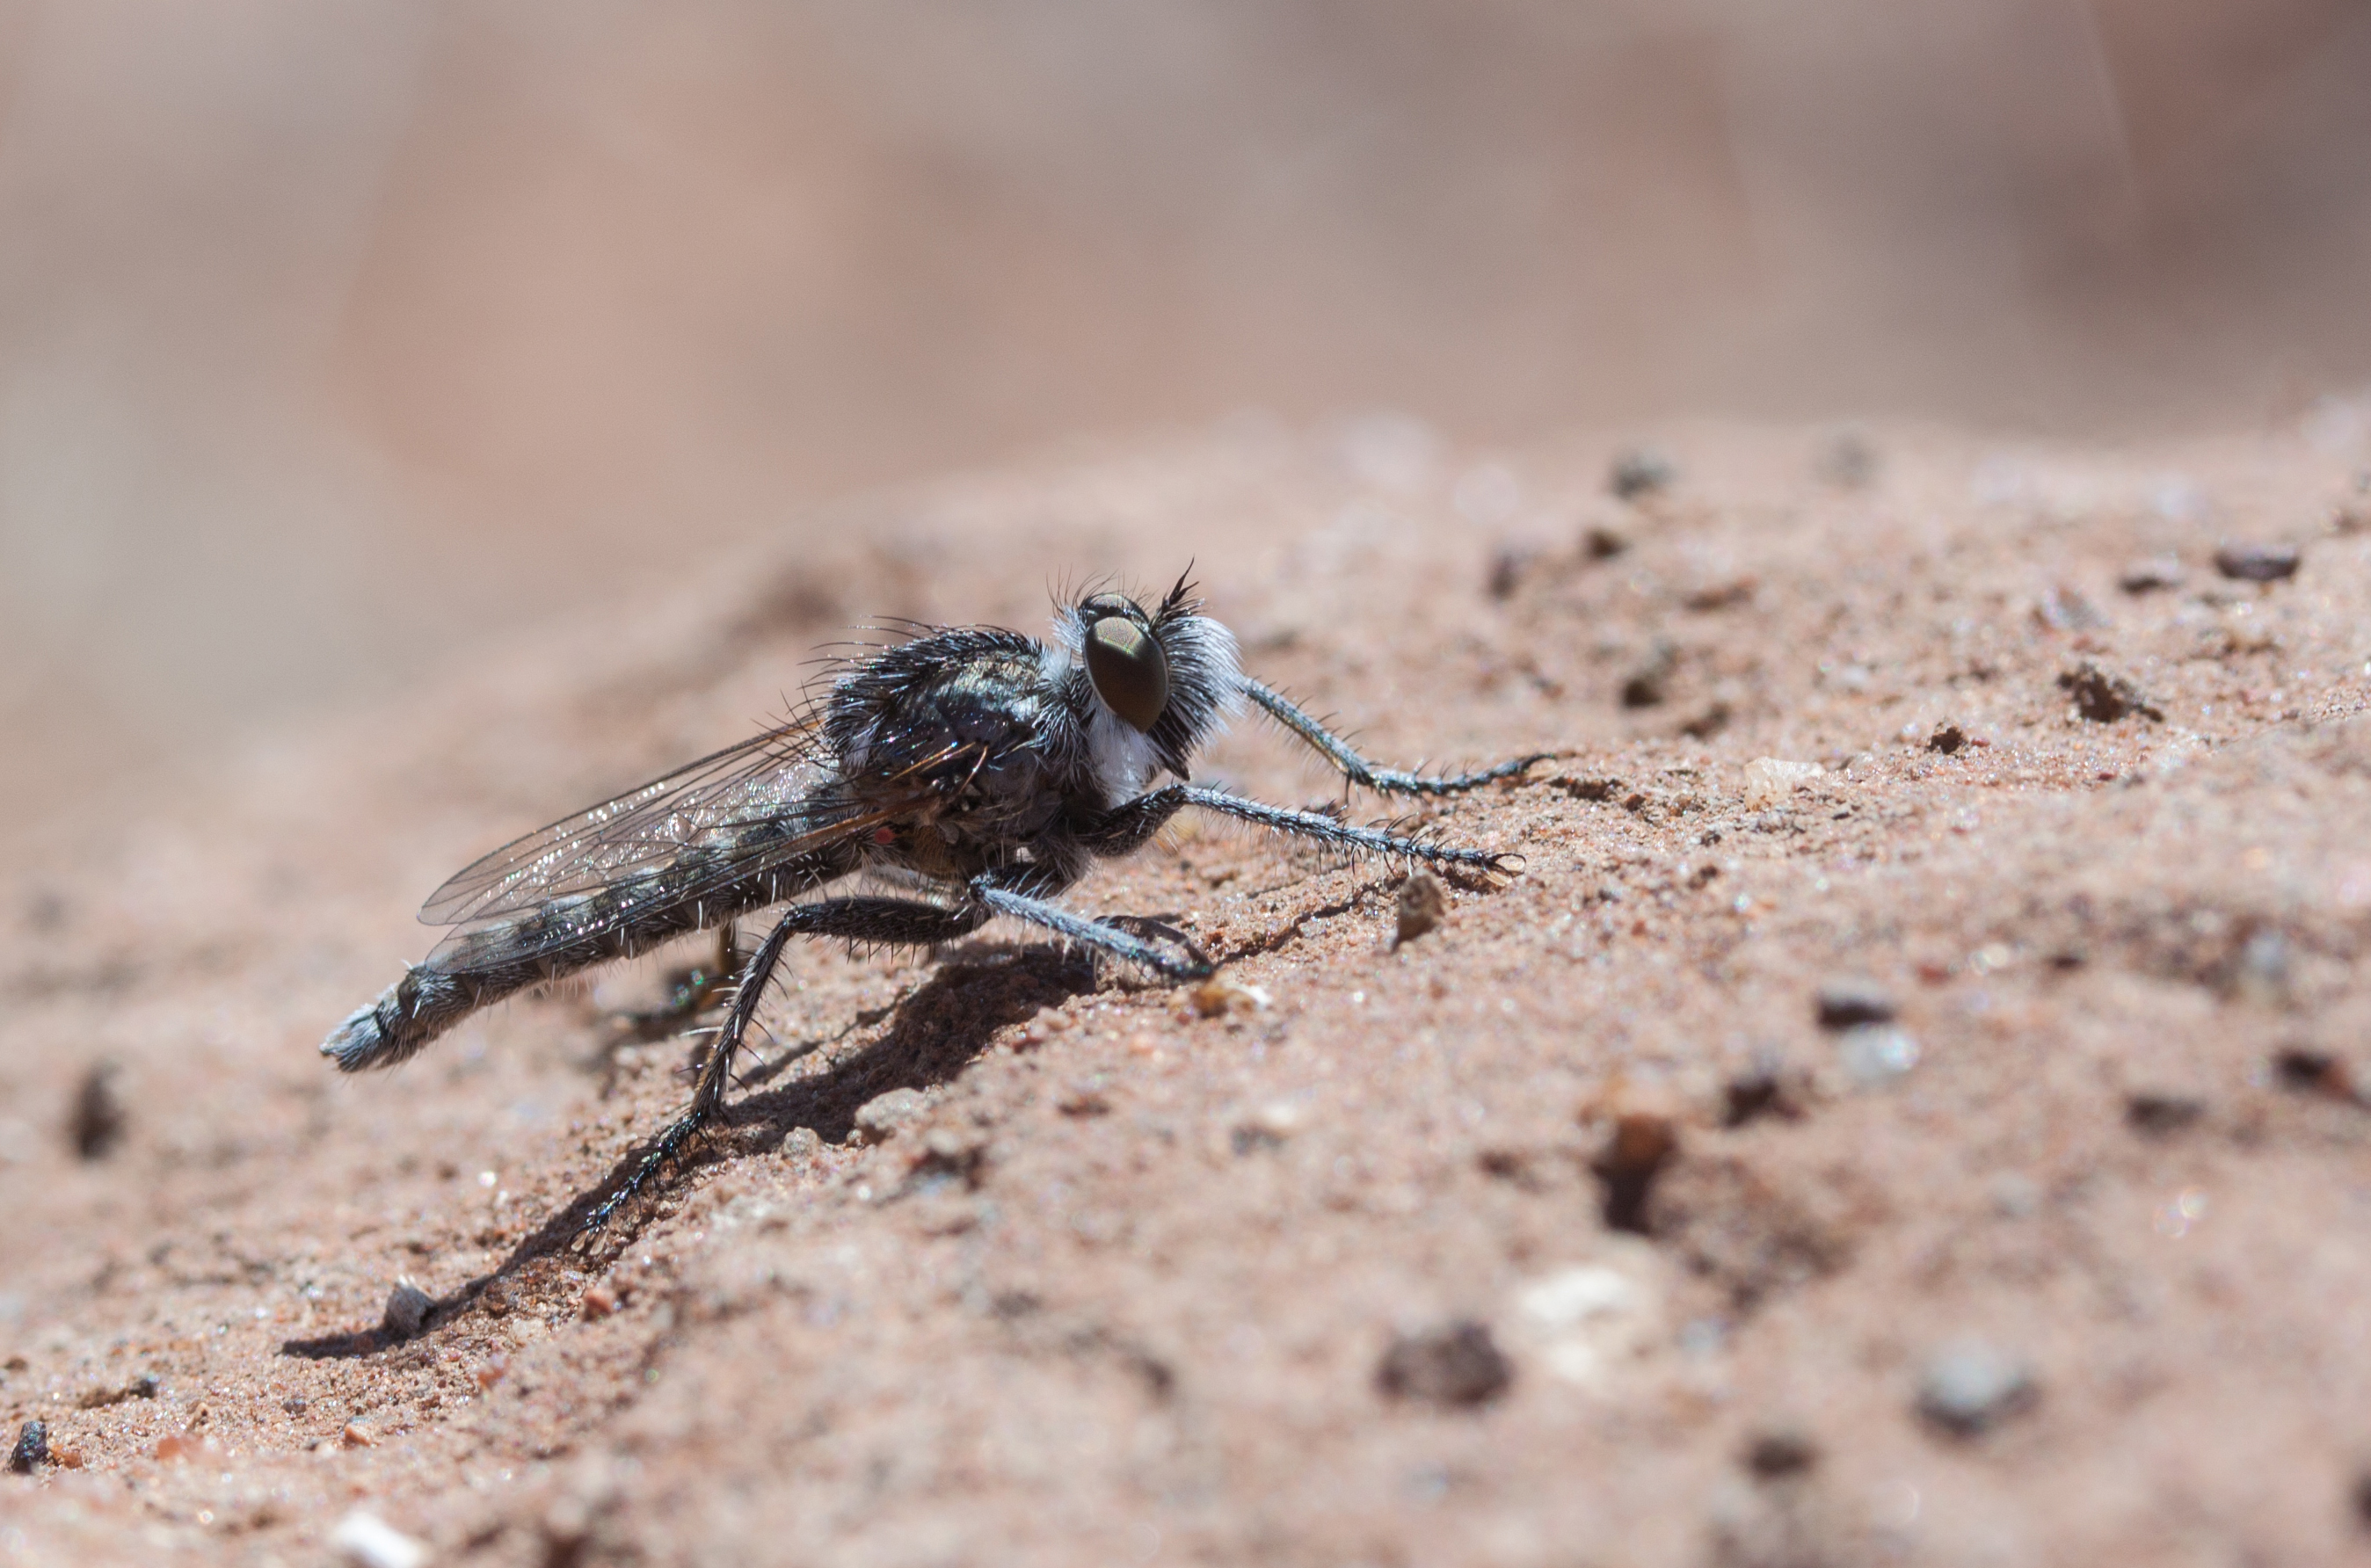 Robber fly, South Africa, 2012